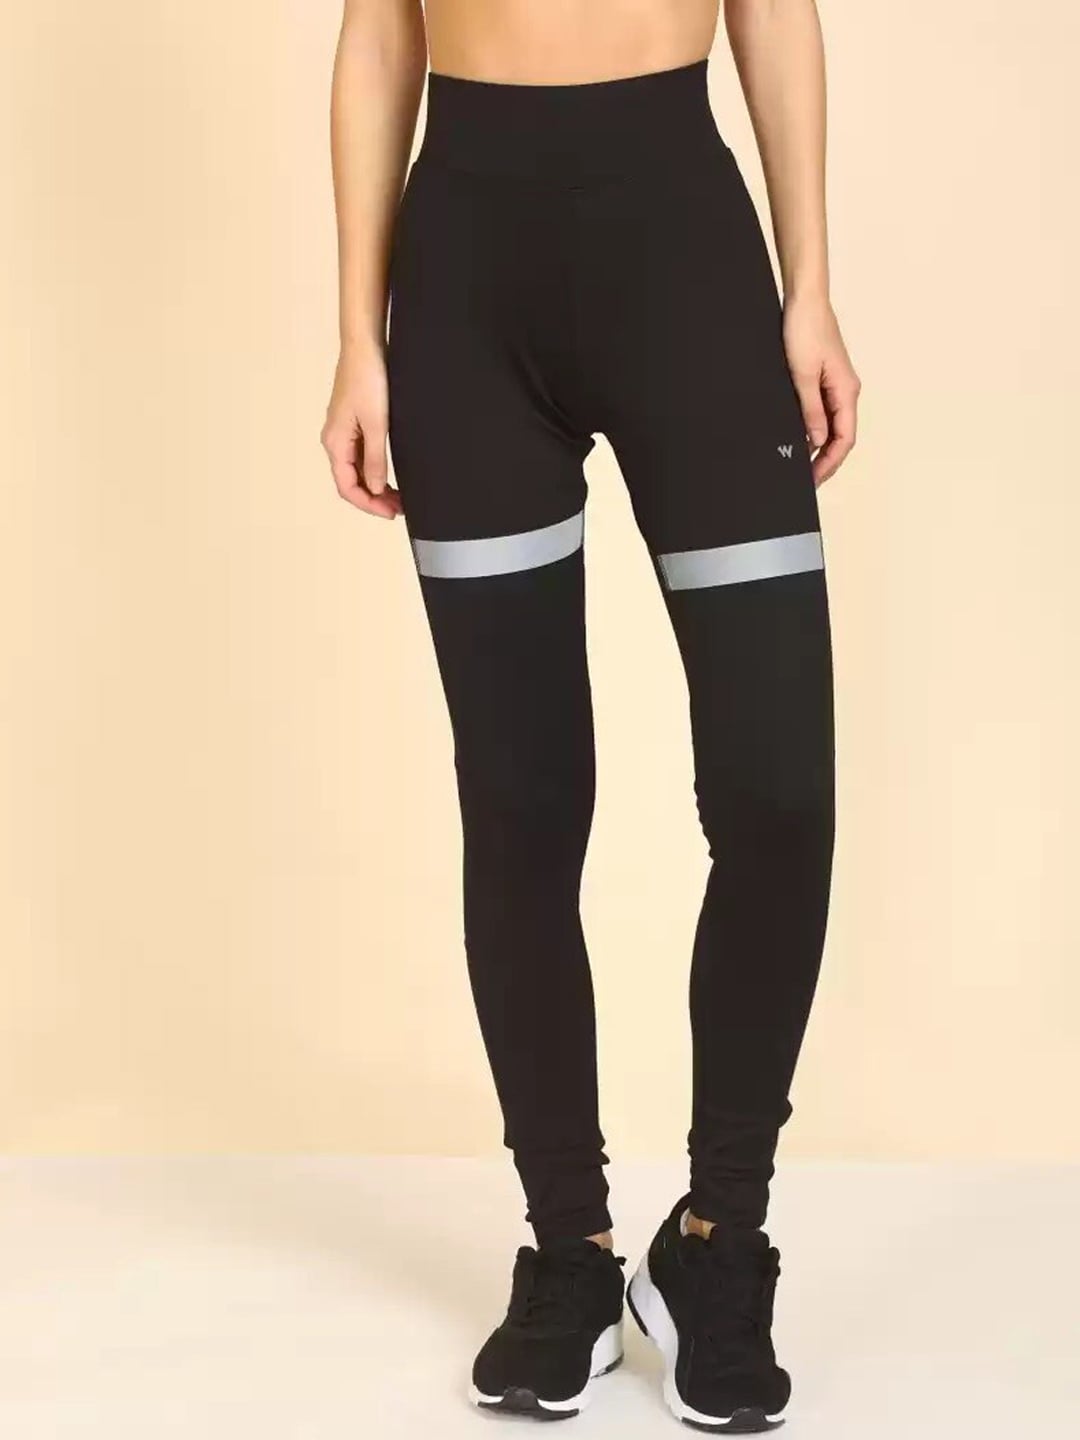 Wildcraft Women Black Solid Tights Price in India